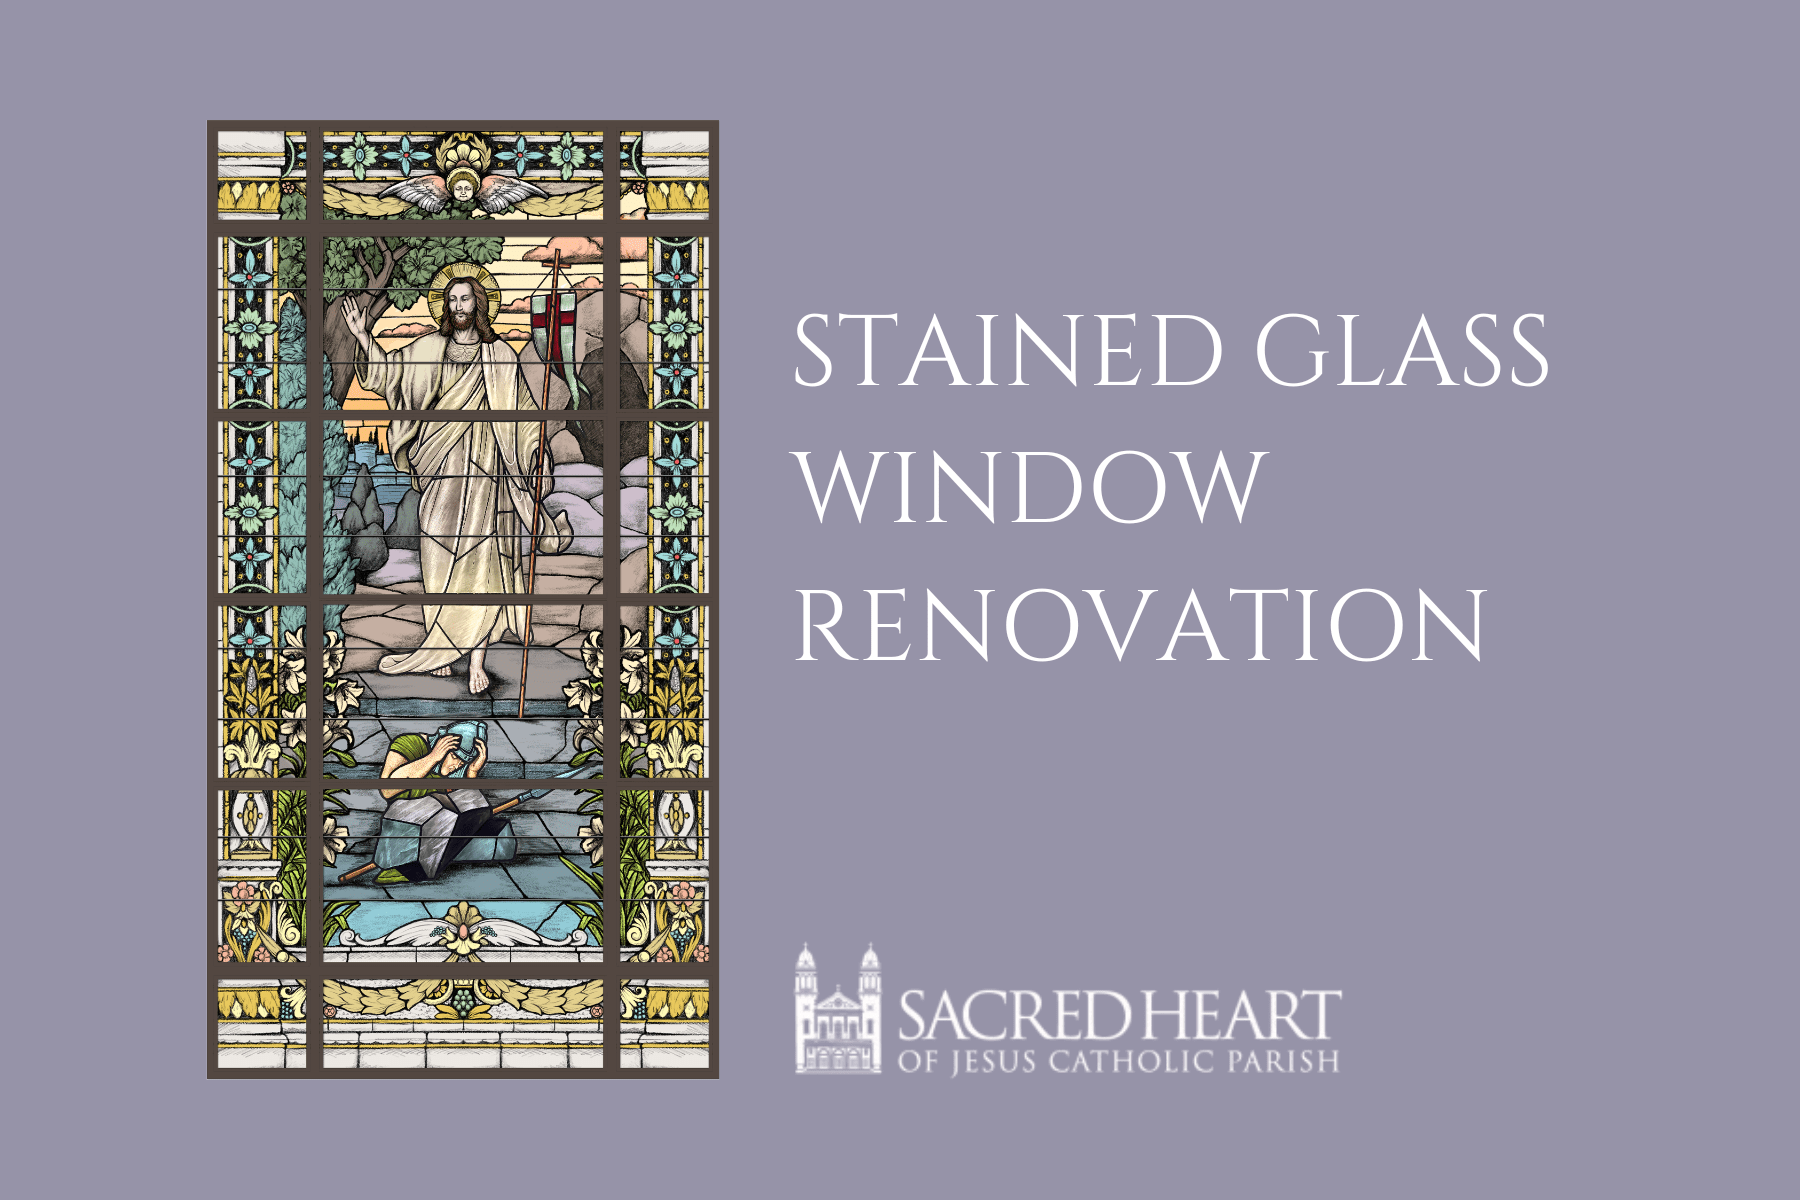 STAINED GLASS WINDOW RENOVATION